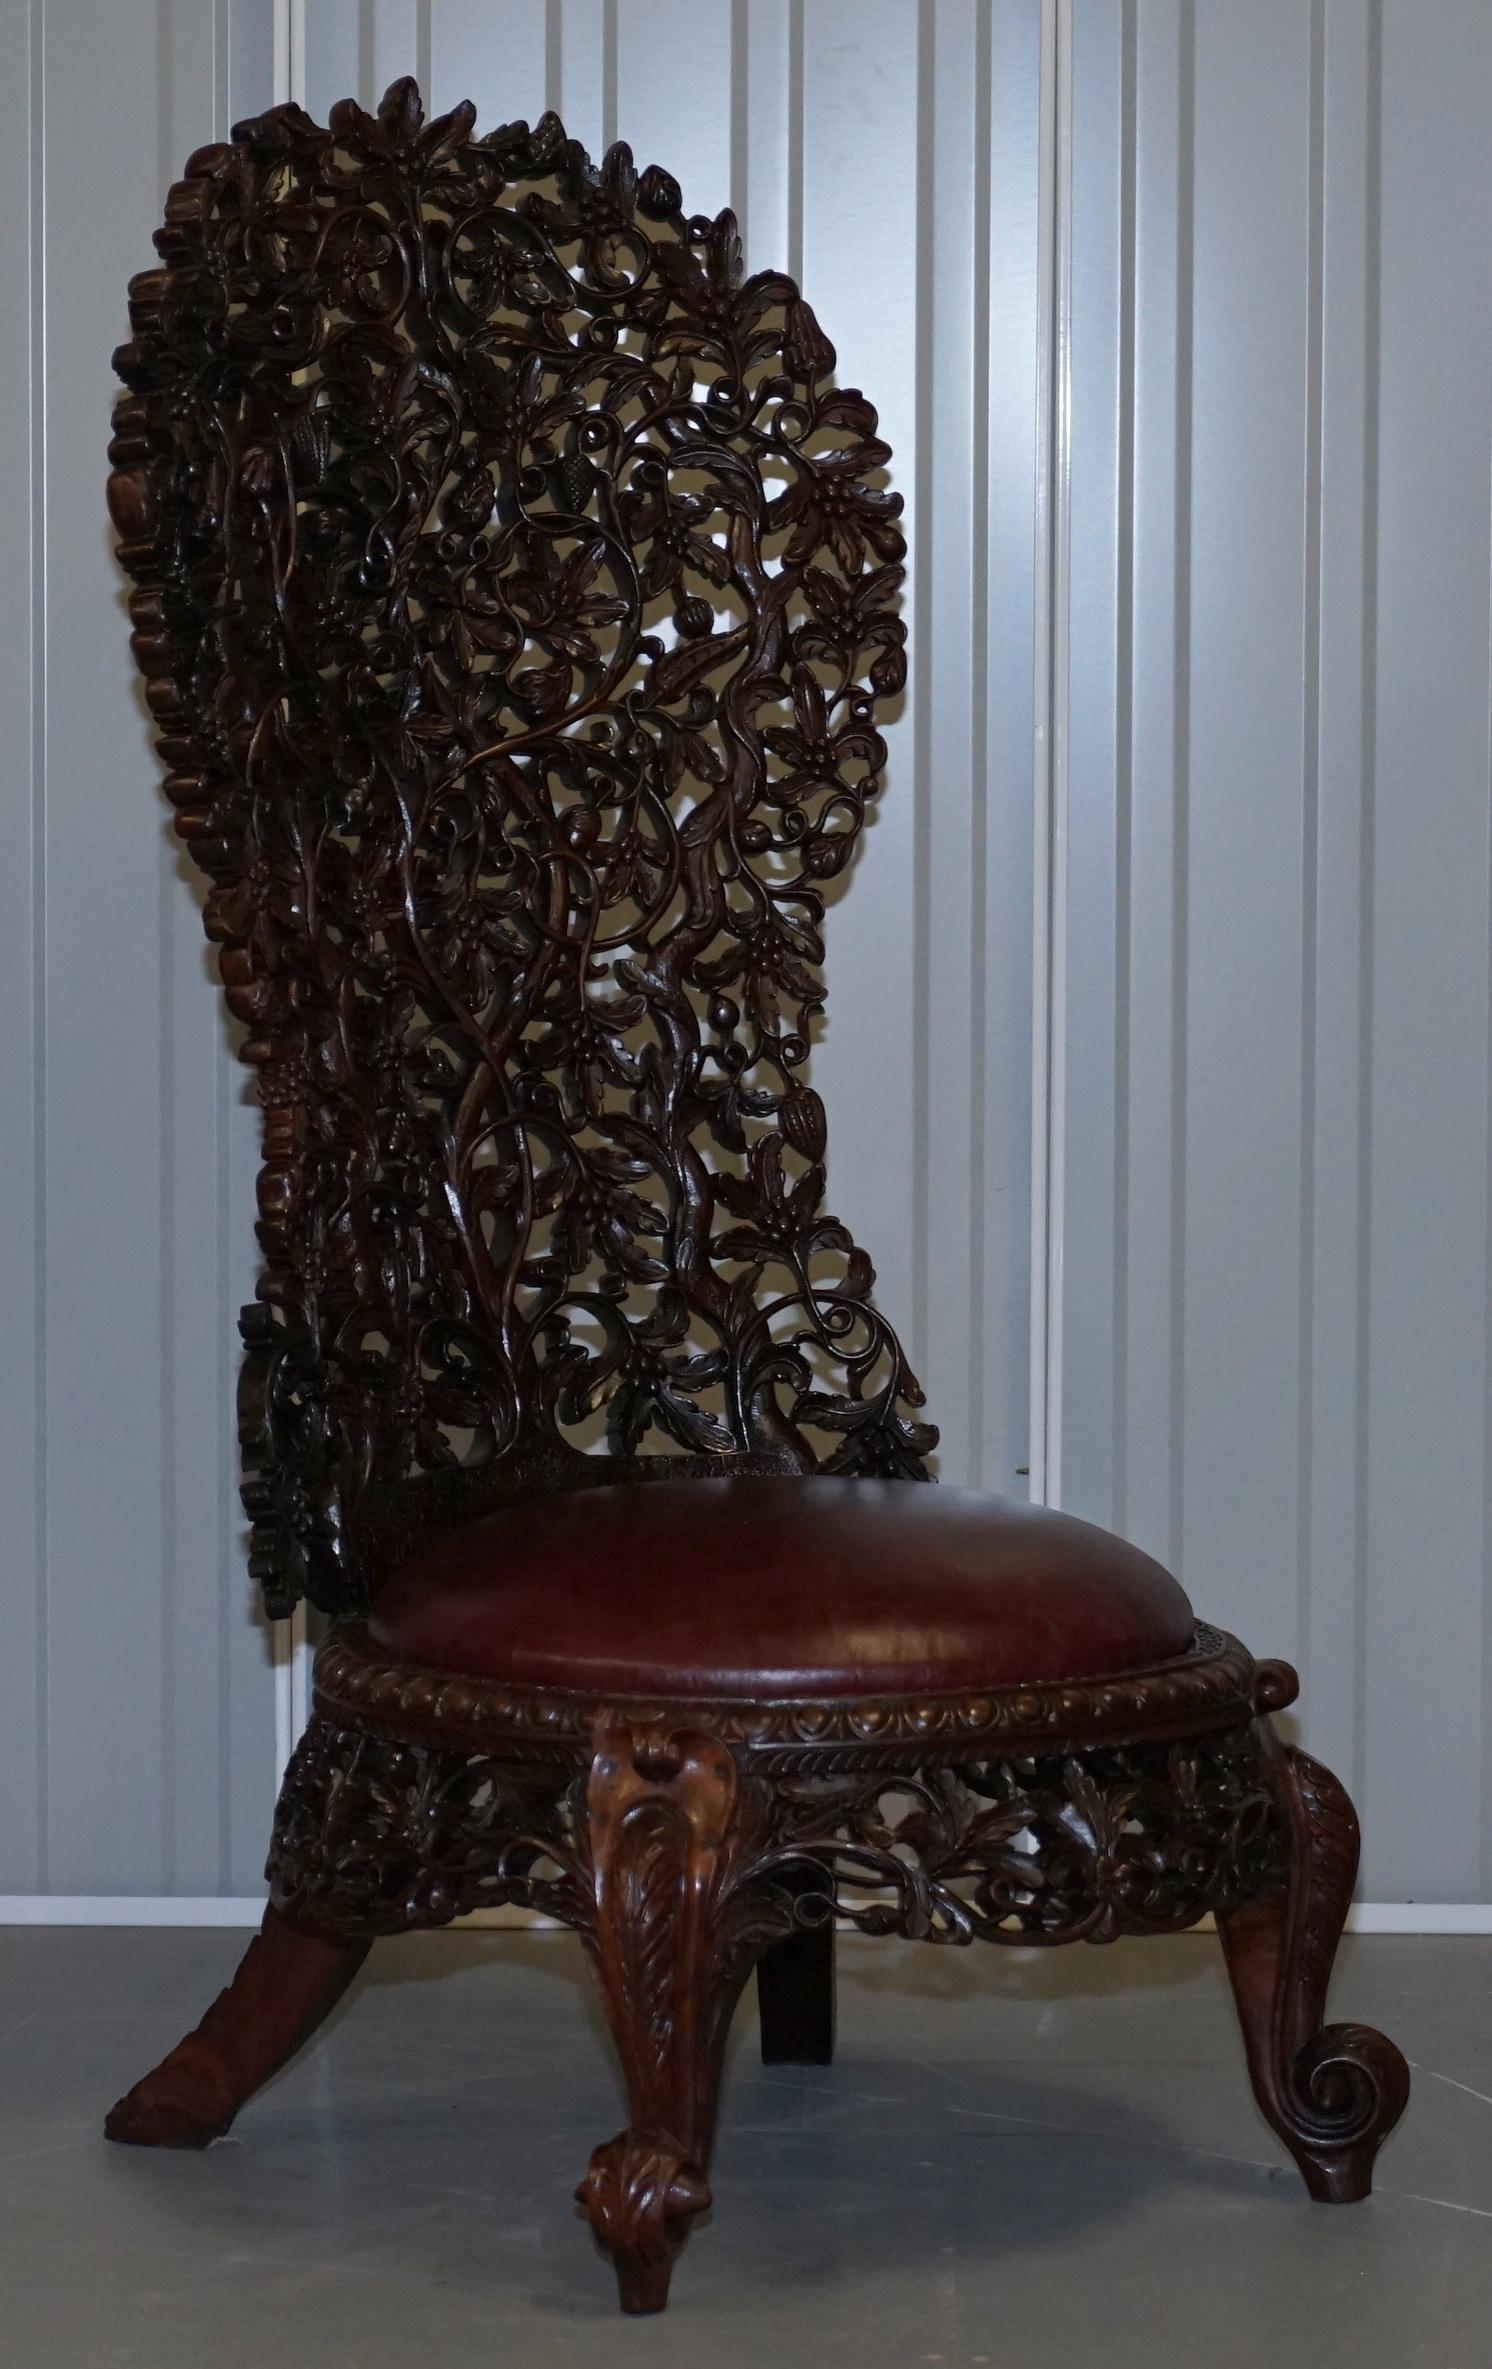 We are delighted to offer for sale this is for an original pair of solid rare wood with new oxblood leather seats “His & Hers” pair of Anglo-Indian Burmese hand carved high back chairs

A very rare find, you see singles pop up every now and again